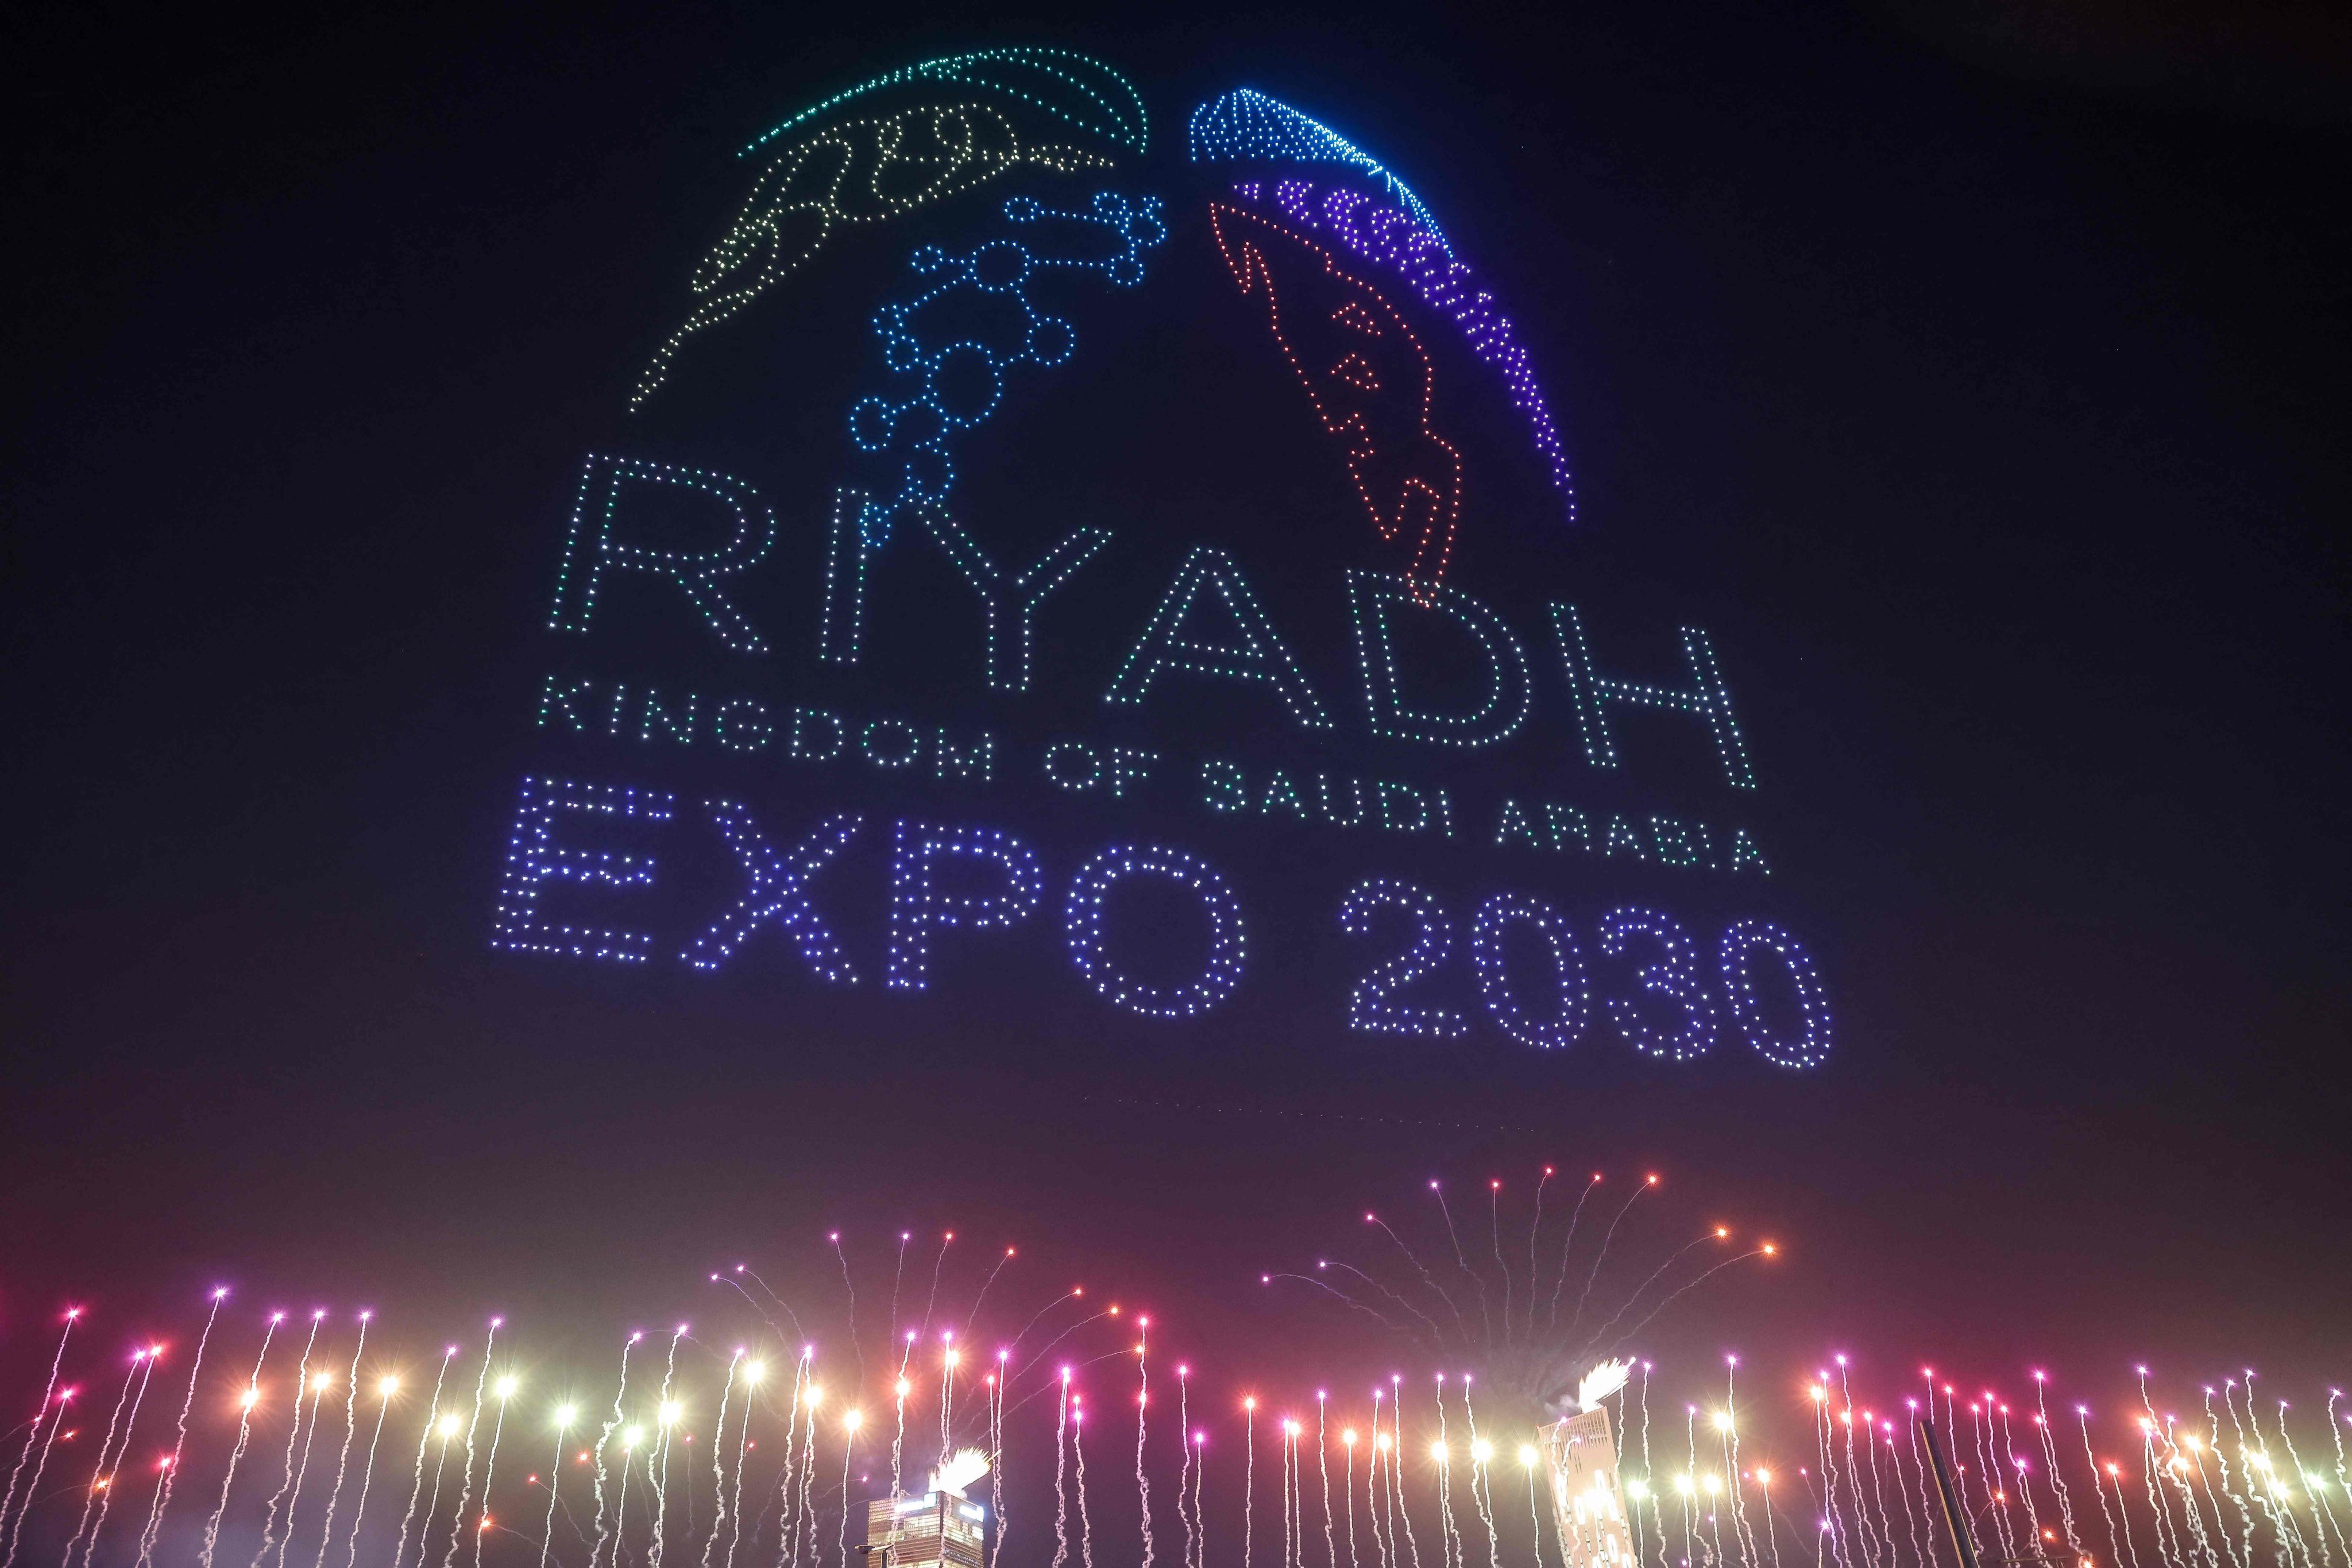 A light display created using drones is performed after Riyadh won the right to host the 2030 World Expo at King Abdullah Financial District in Riyadh, on November 28. Photo: AFP